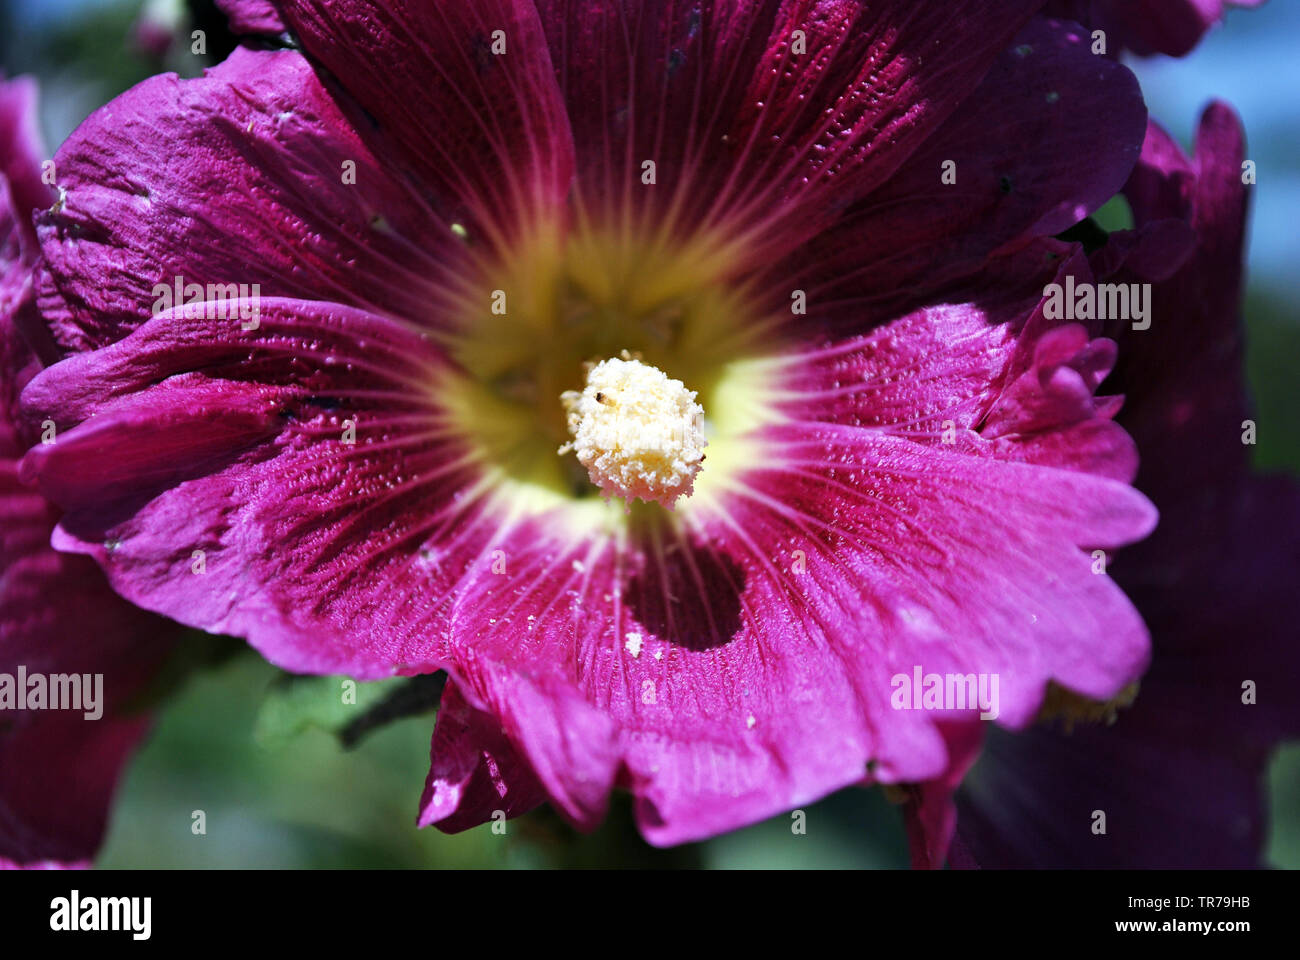 Purple mallow flower, petals and pistil close up detail, soft blurry background Stock Photo